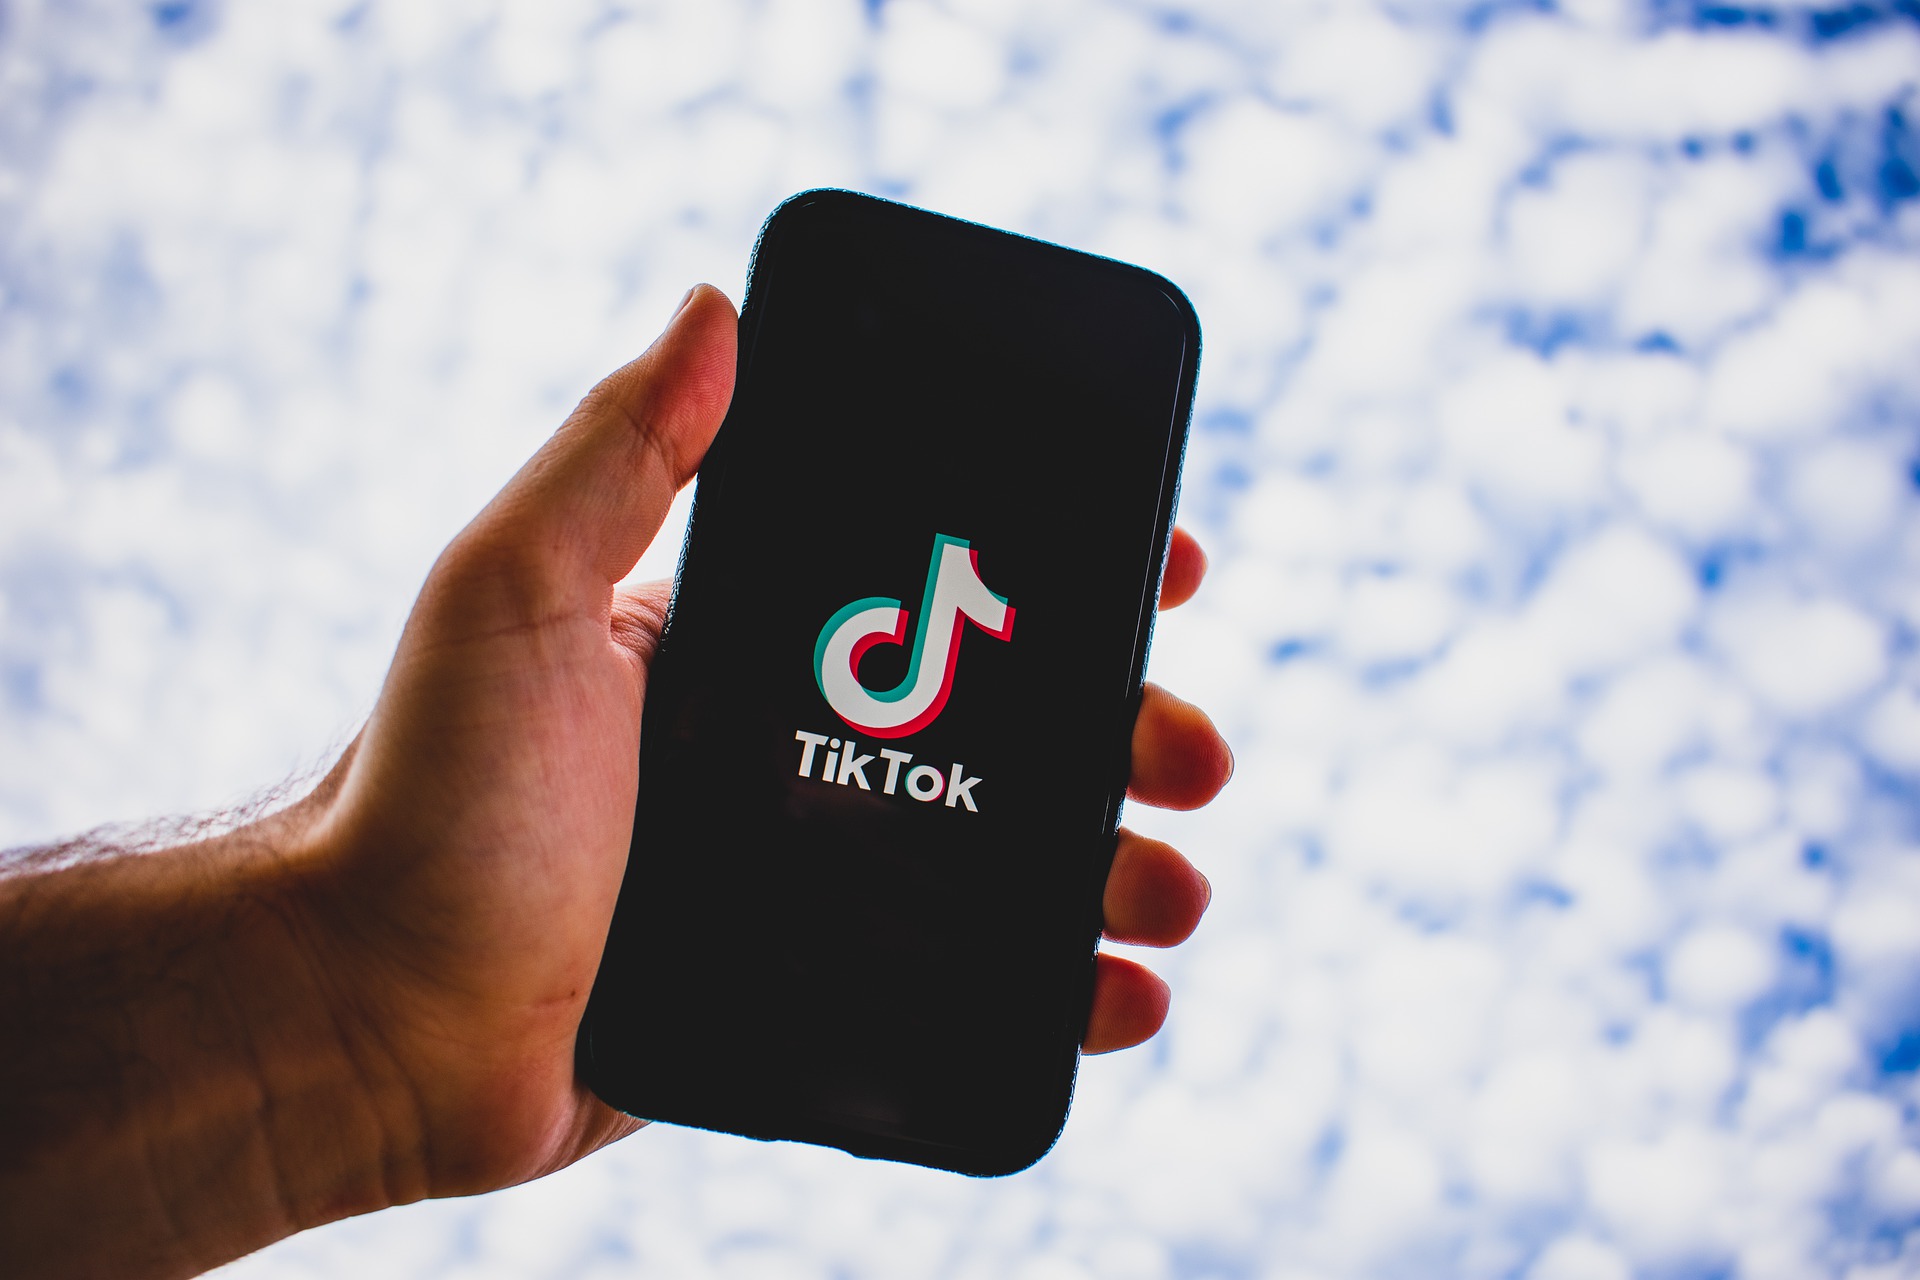 TikTok: learn how to remove a filter or effect from a video